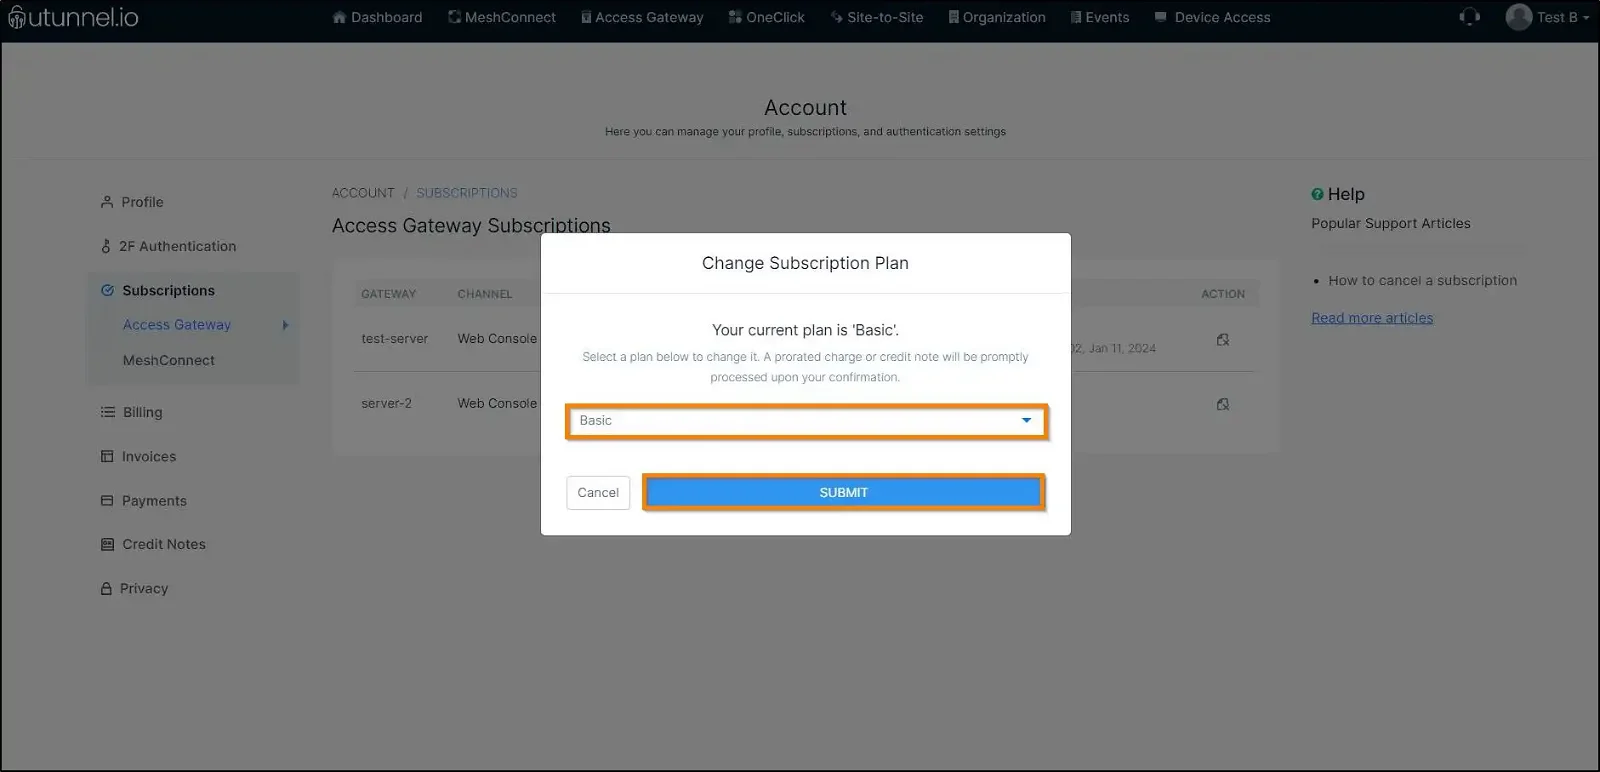 How to Modify Your UTunnel Subscription configure your subscription plan in the change plan pop-up window